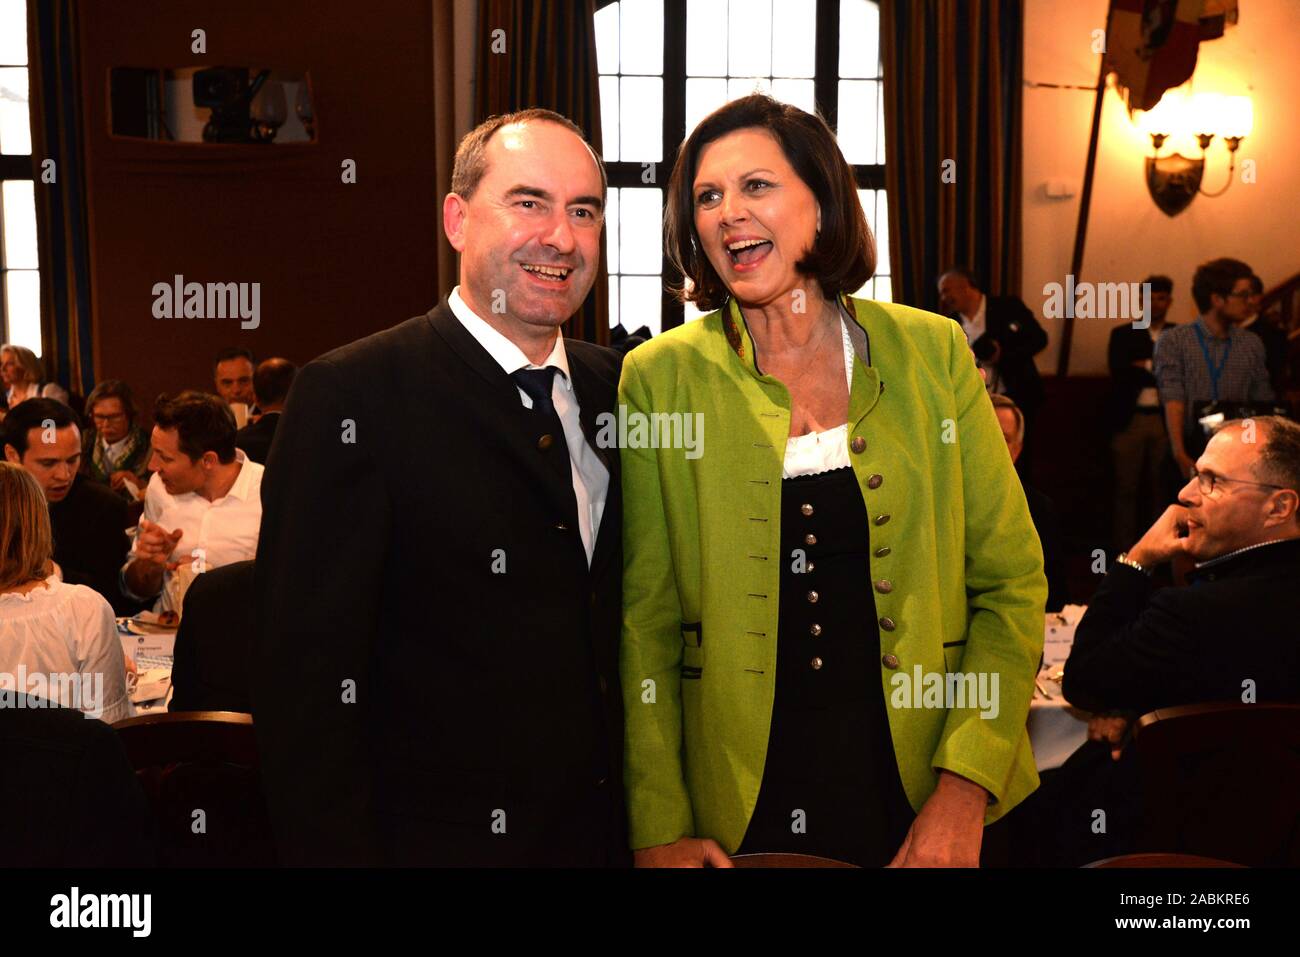 Minister of Economic Affairs Hubert Aiwanger and President of the State  Parliament Ilse Aigner at the Hofbräuhaus in Munich at the traditional  Maibock opening of the State Hofbräu Brewery in 2019. [automated